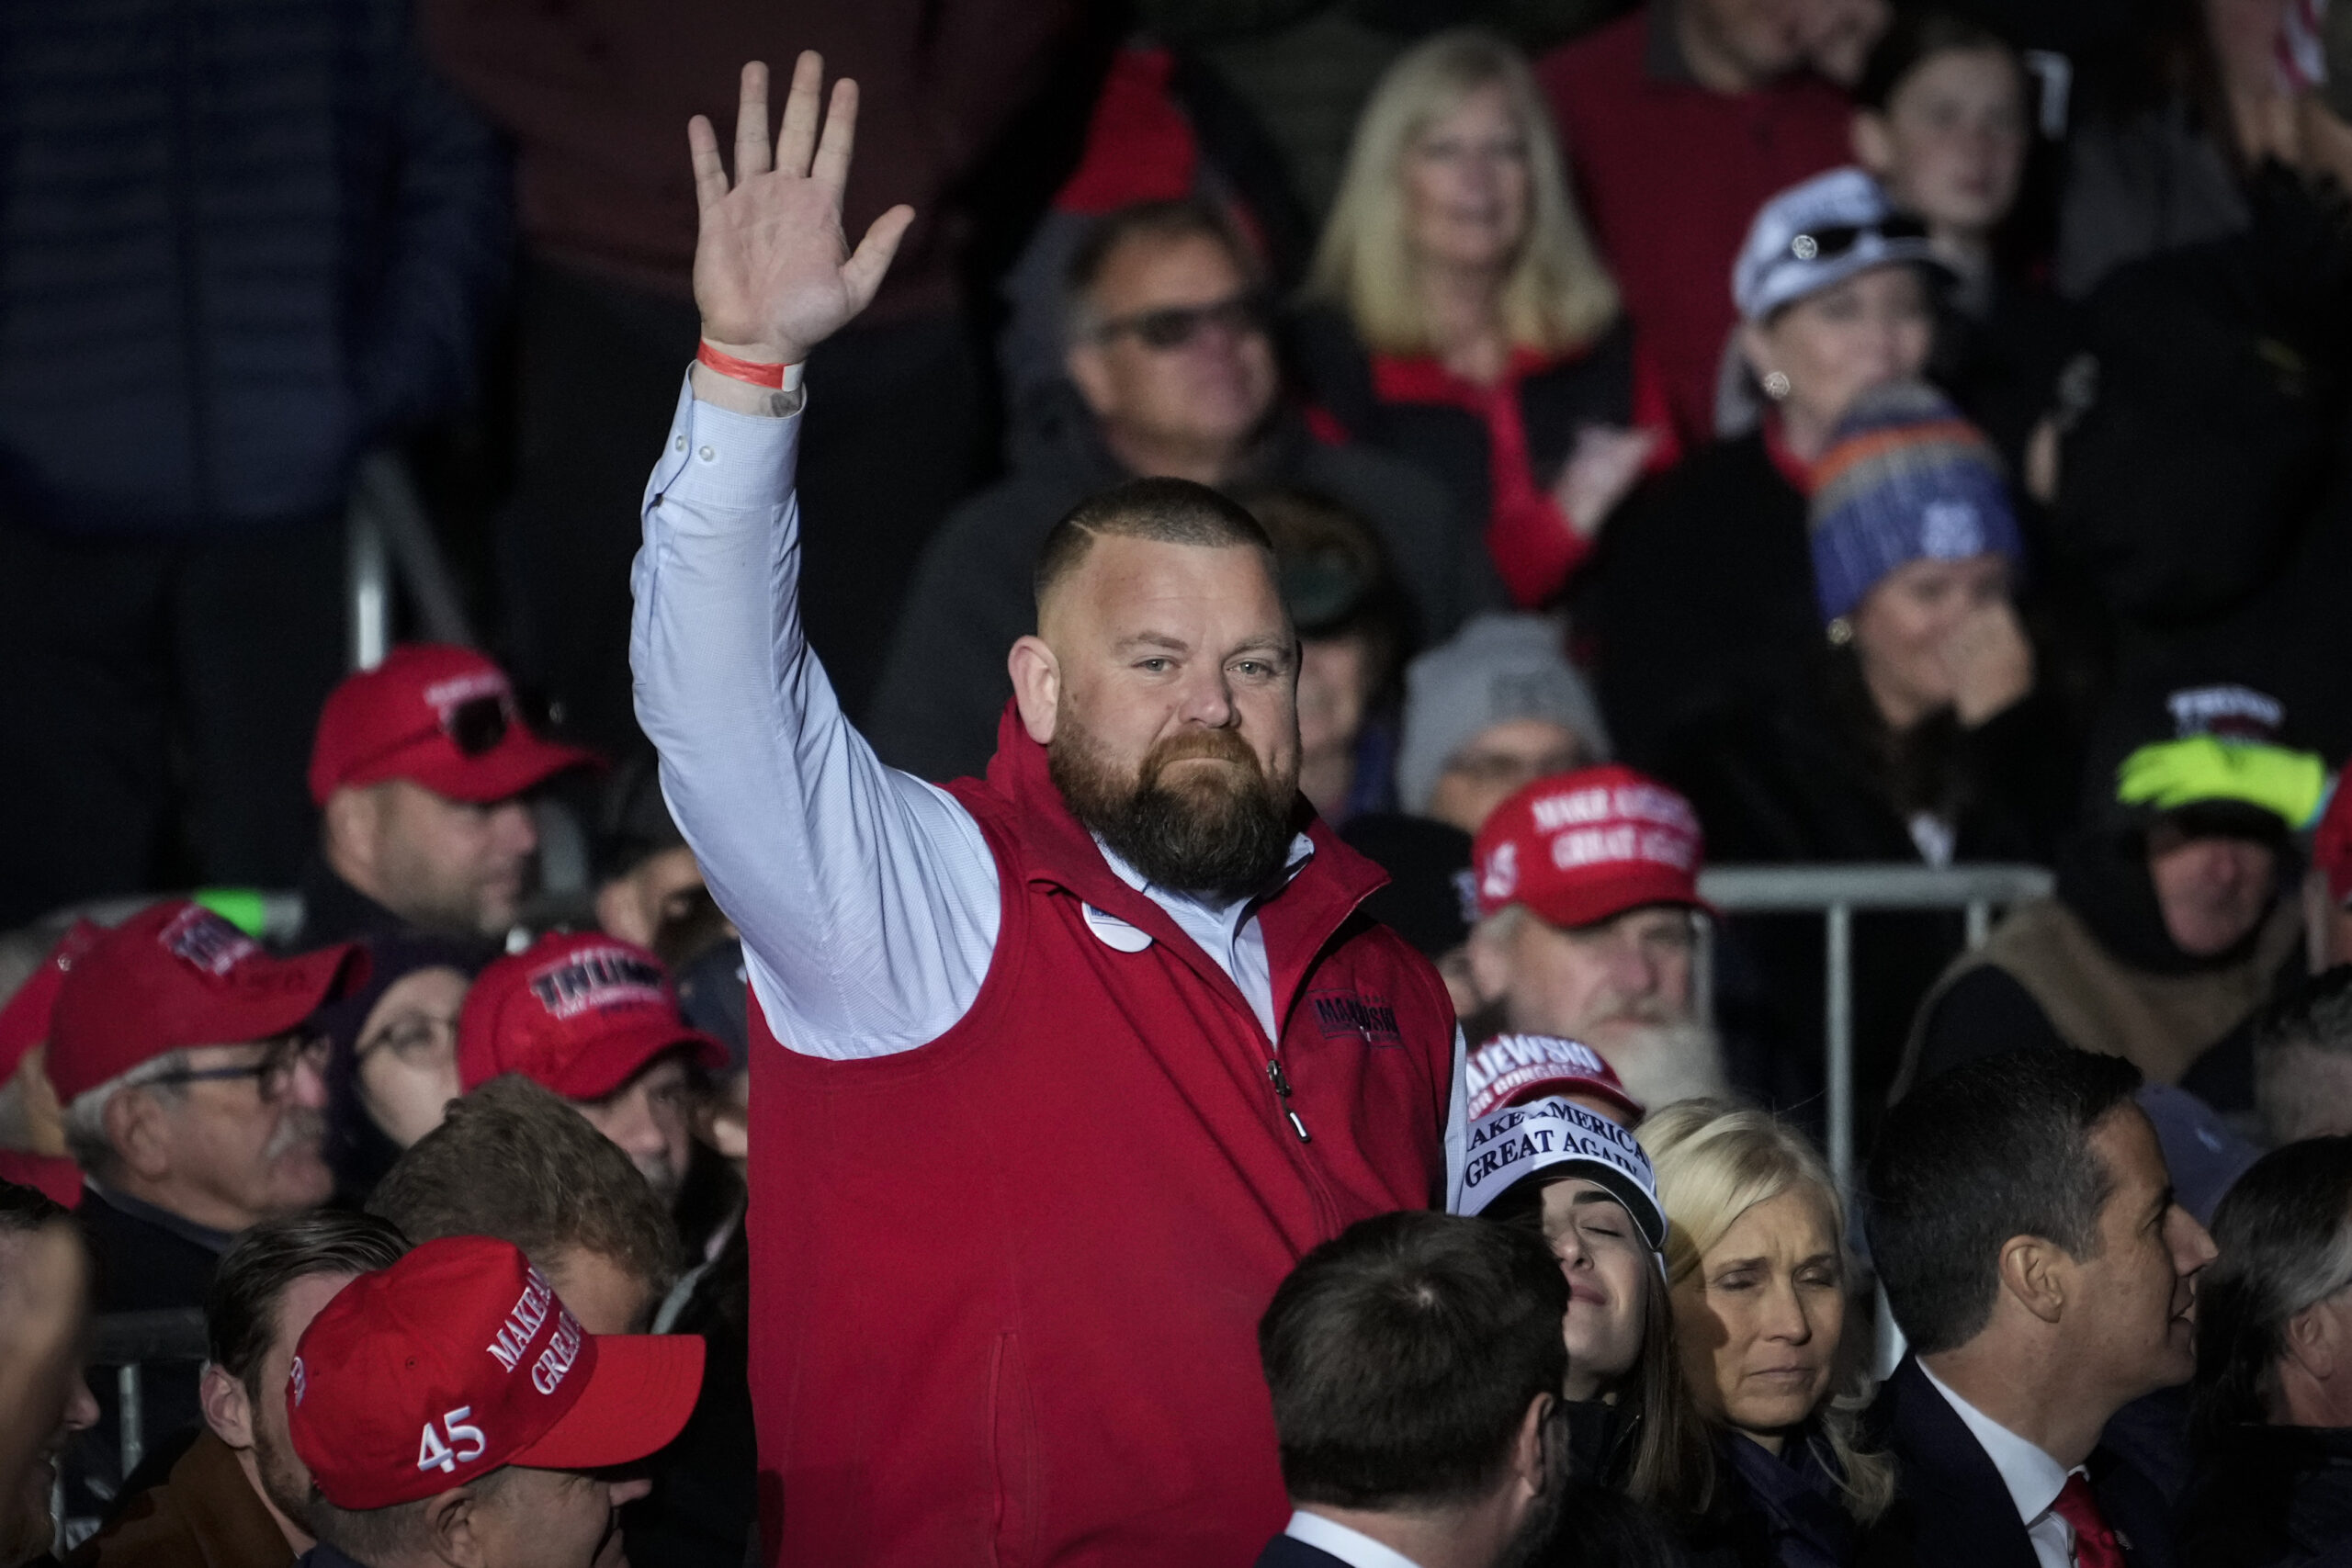 Republican Congressional candidate J.R. Majewski acknowledges the crowd after being introduced by former President Donald Trump at a rally for Ohio Republicans.